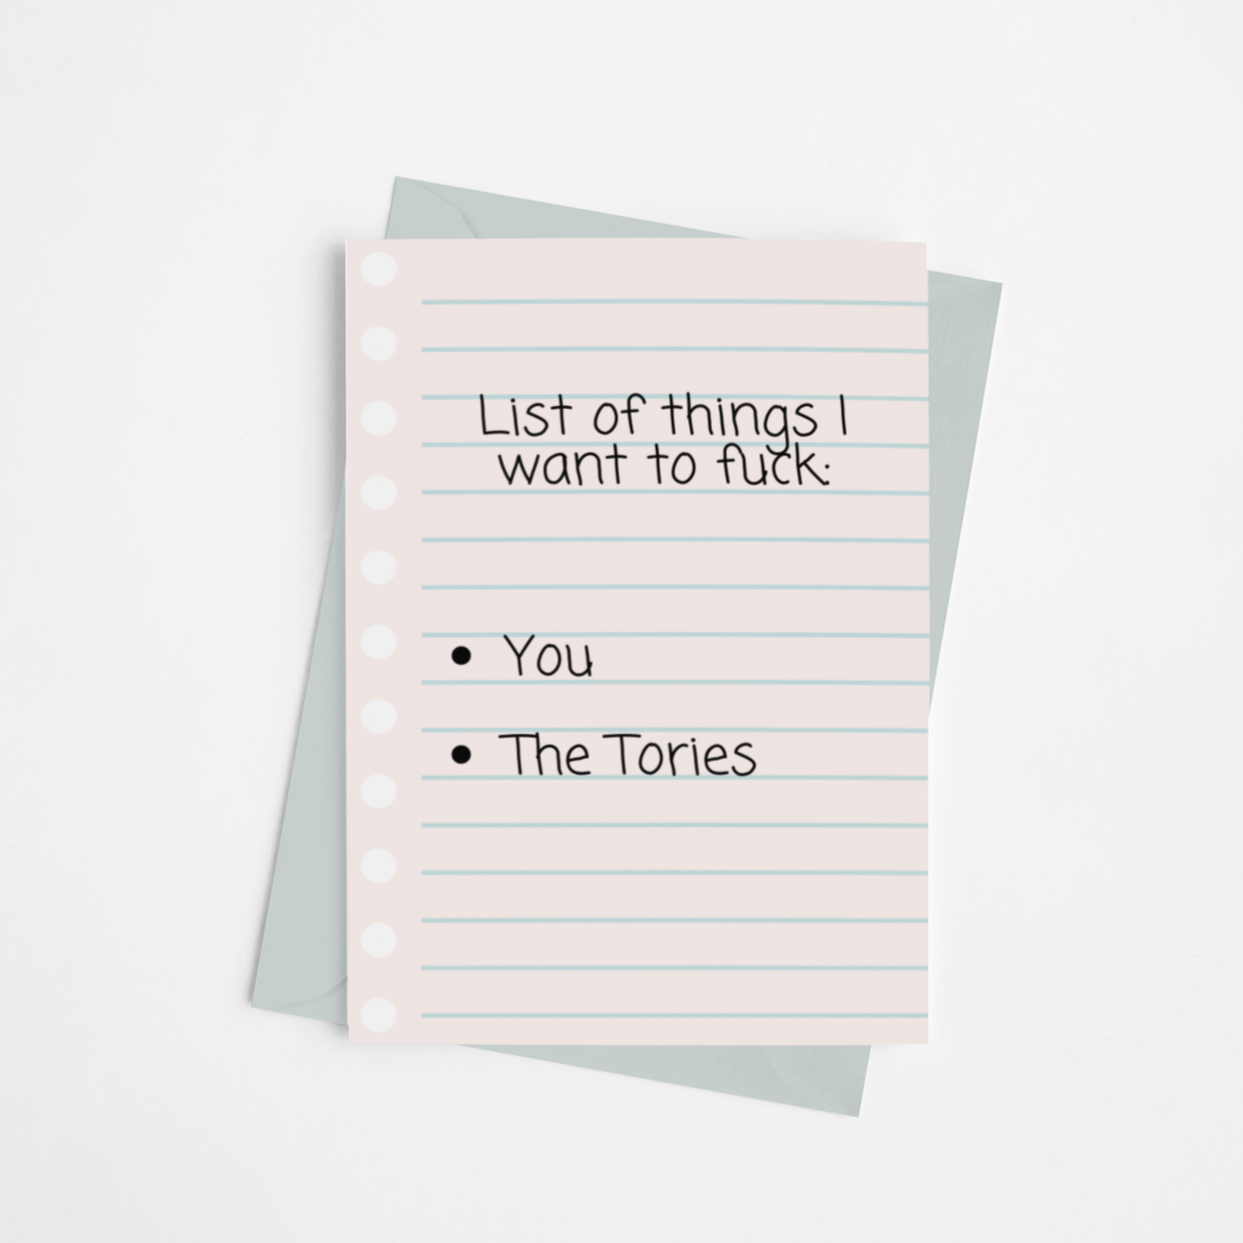 List of Things I Want to Fuck Valentines Card